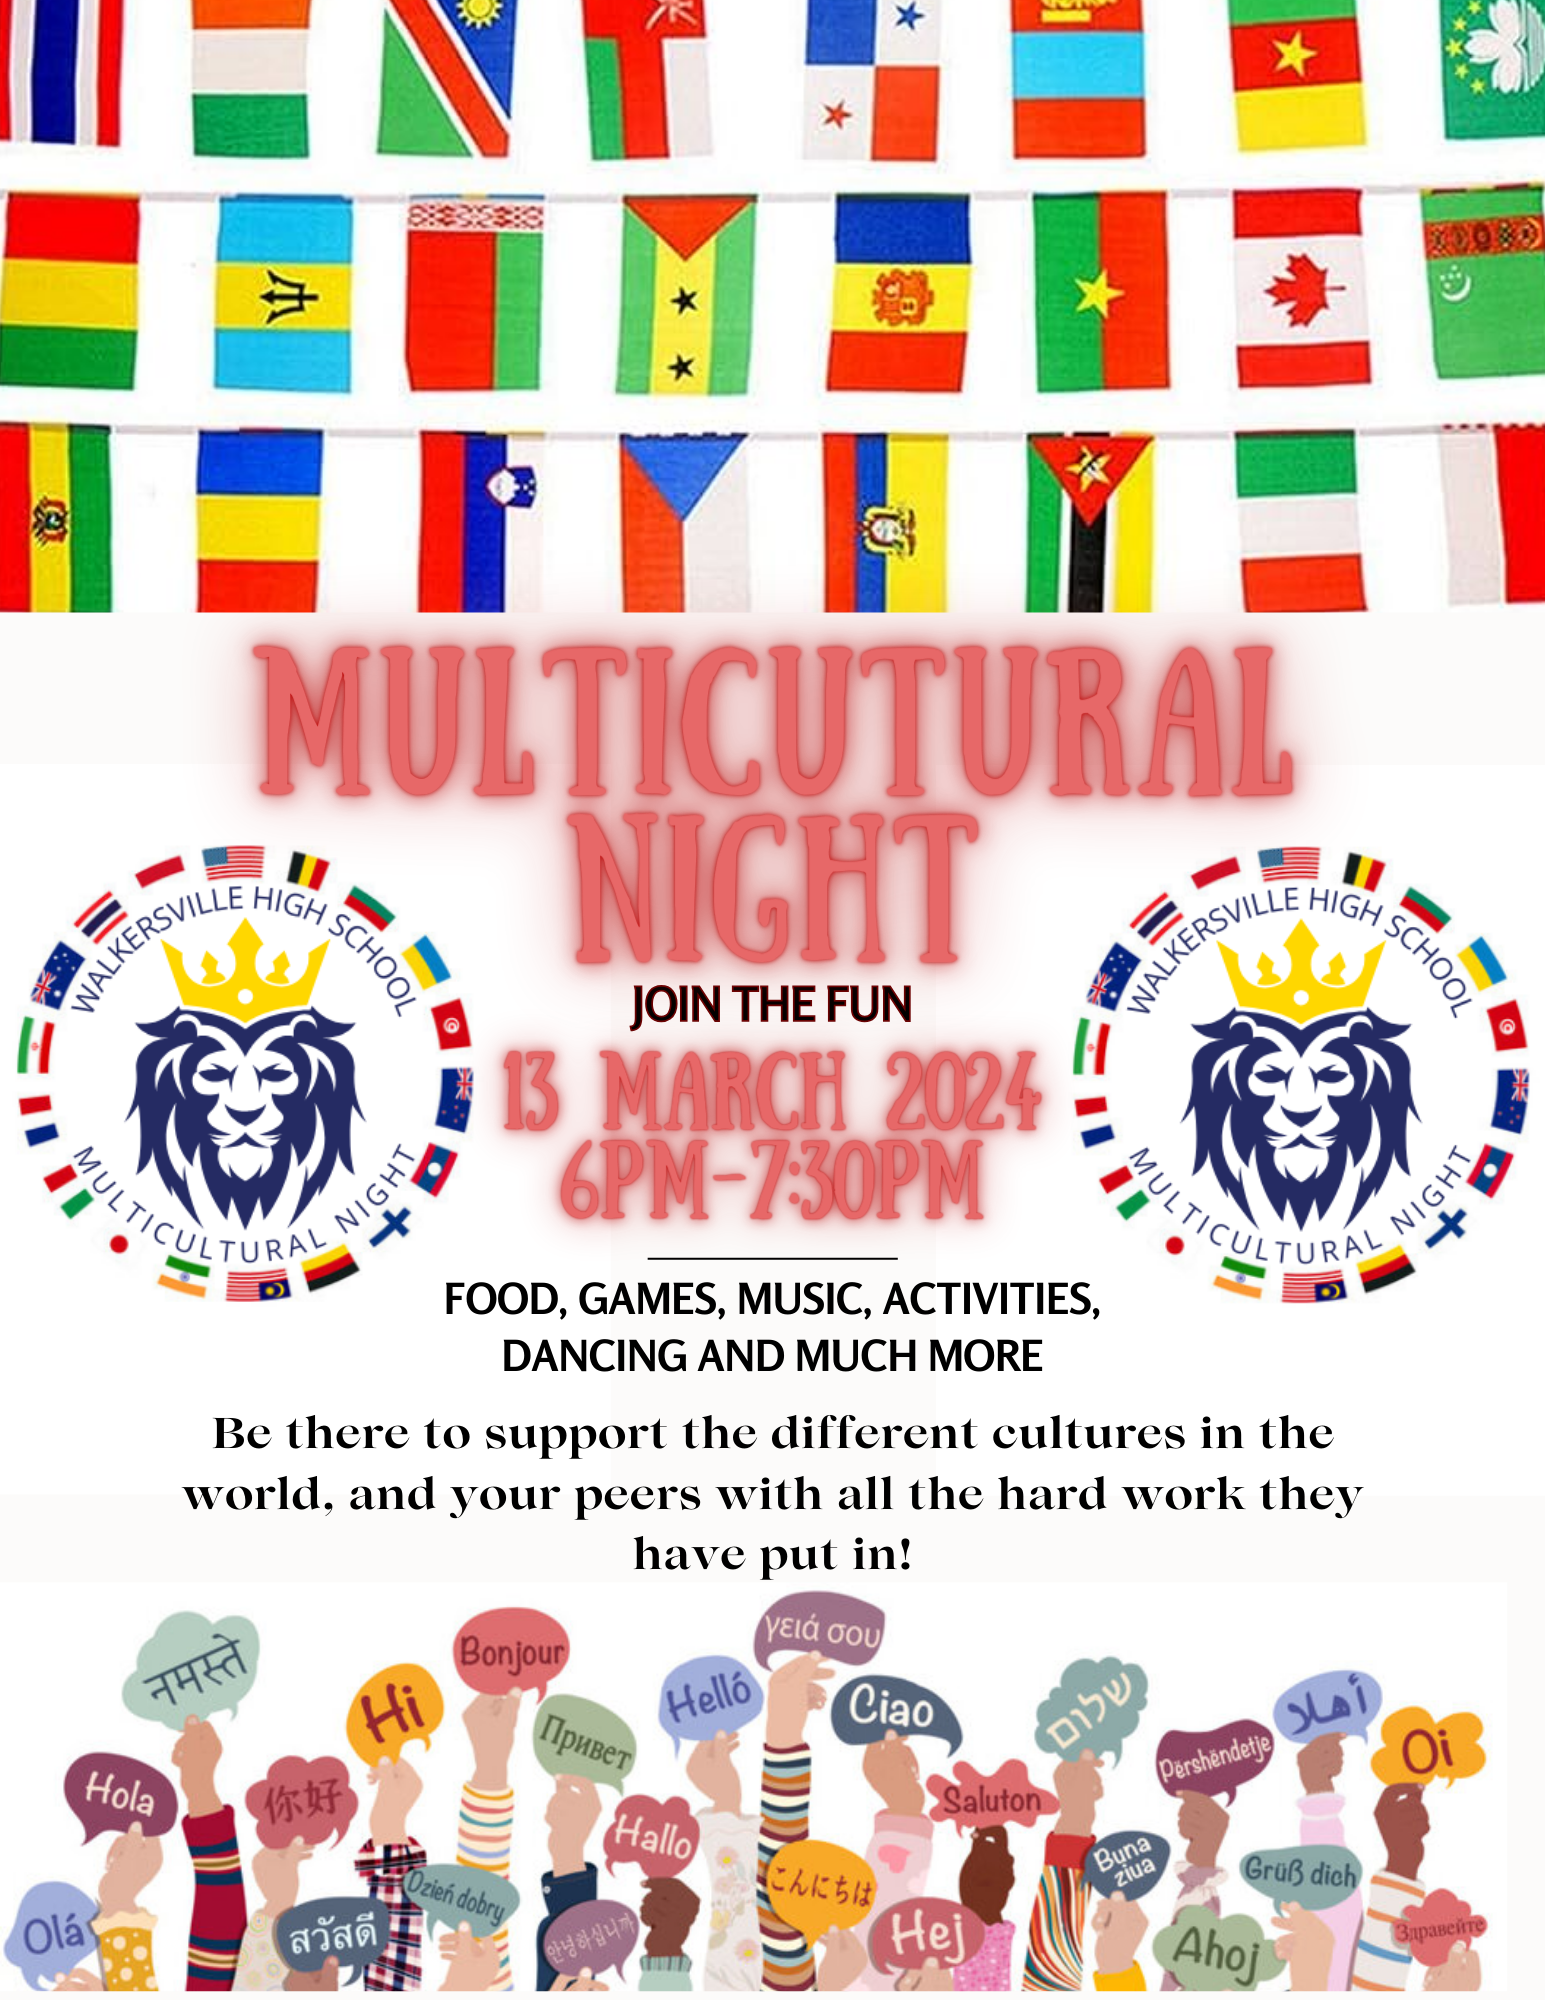 Multicultural Night Wednesday, March 13th, from 6pm to 7:30pm to celebrate with us! 